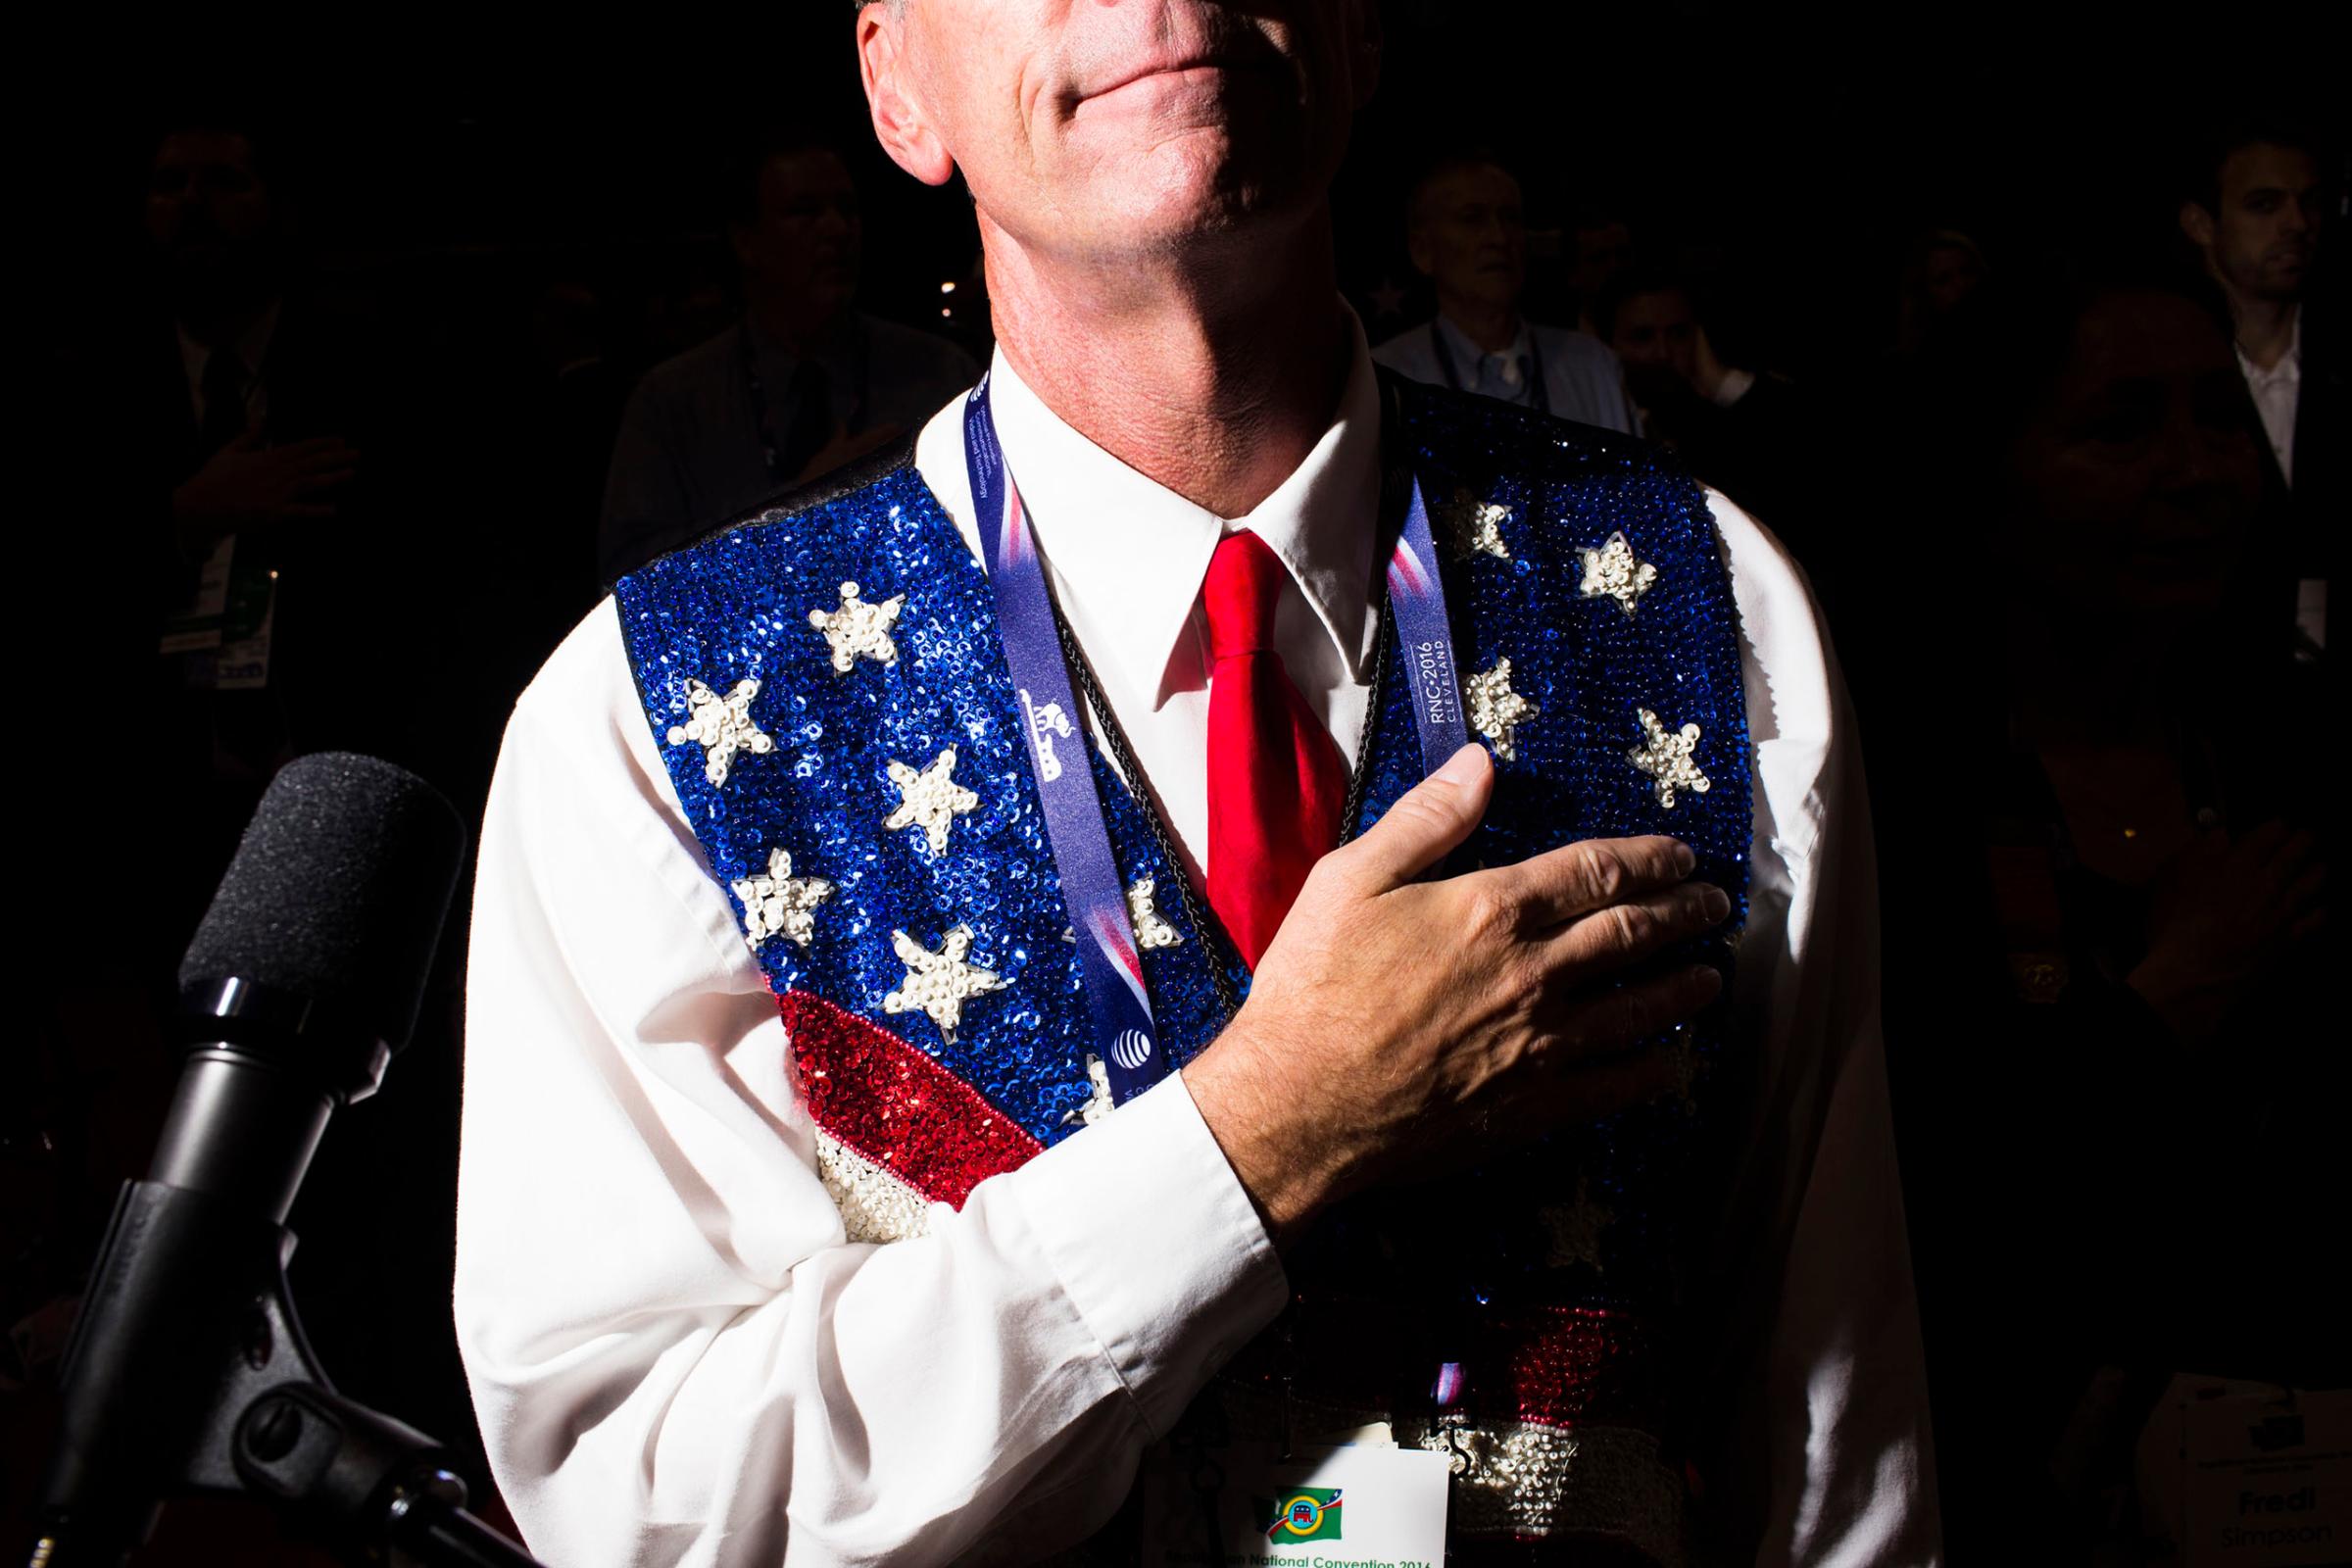 CLEVELAND - JULY 18: Scenes from the floor of the 2016 Republican National Convention on Monday, July 18, 2016, in Cleveland, Ohio. (Photo by Landon Nordeman)